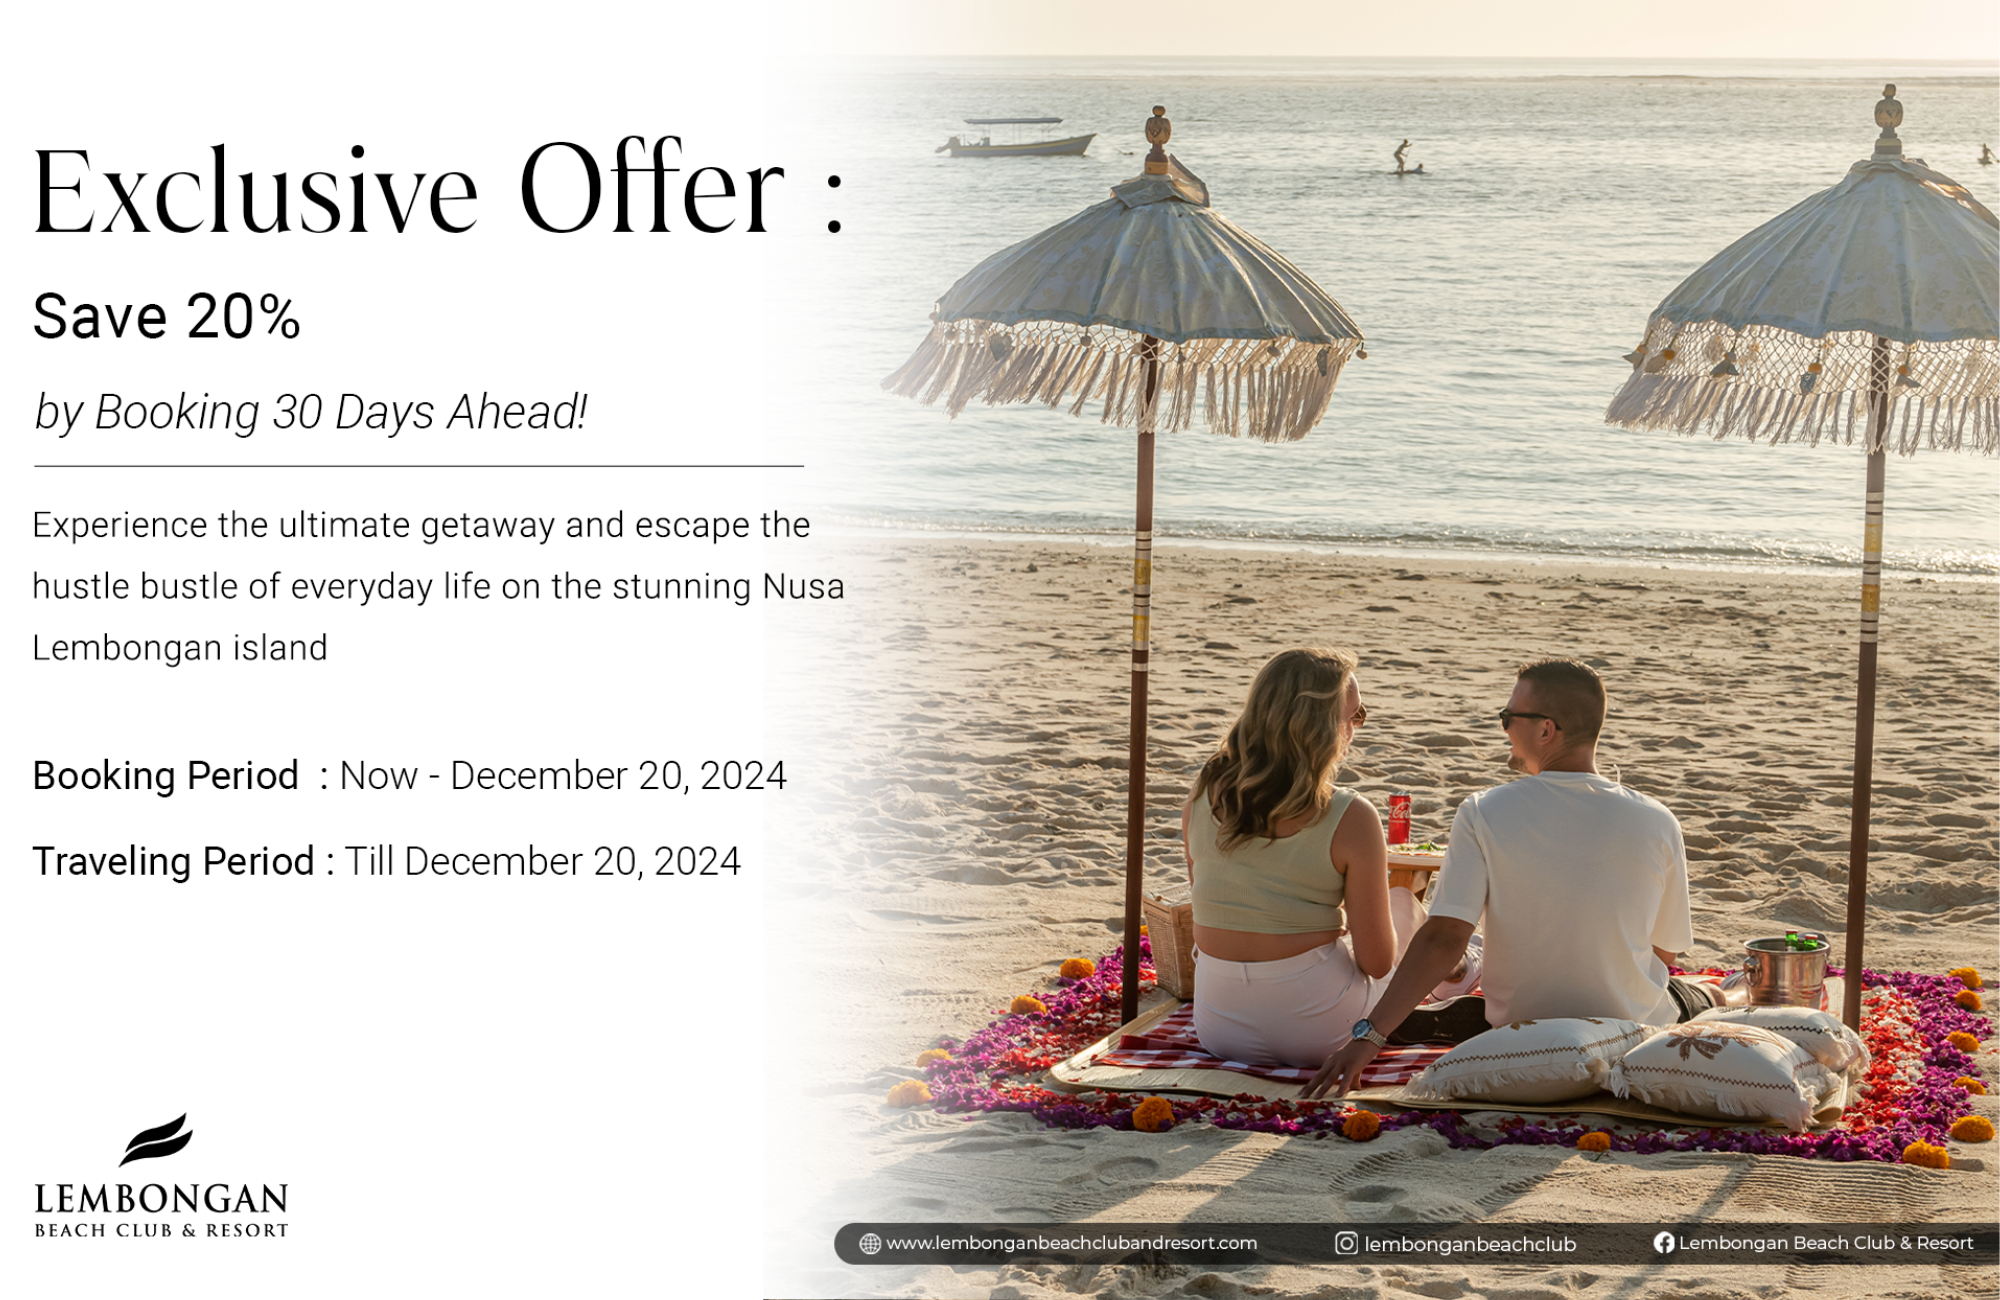 Exclusive Offer: Save 20% by Booking 30 Days Ahead!